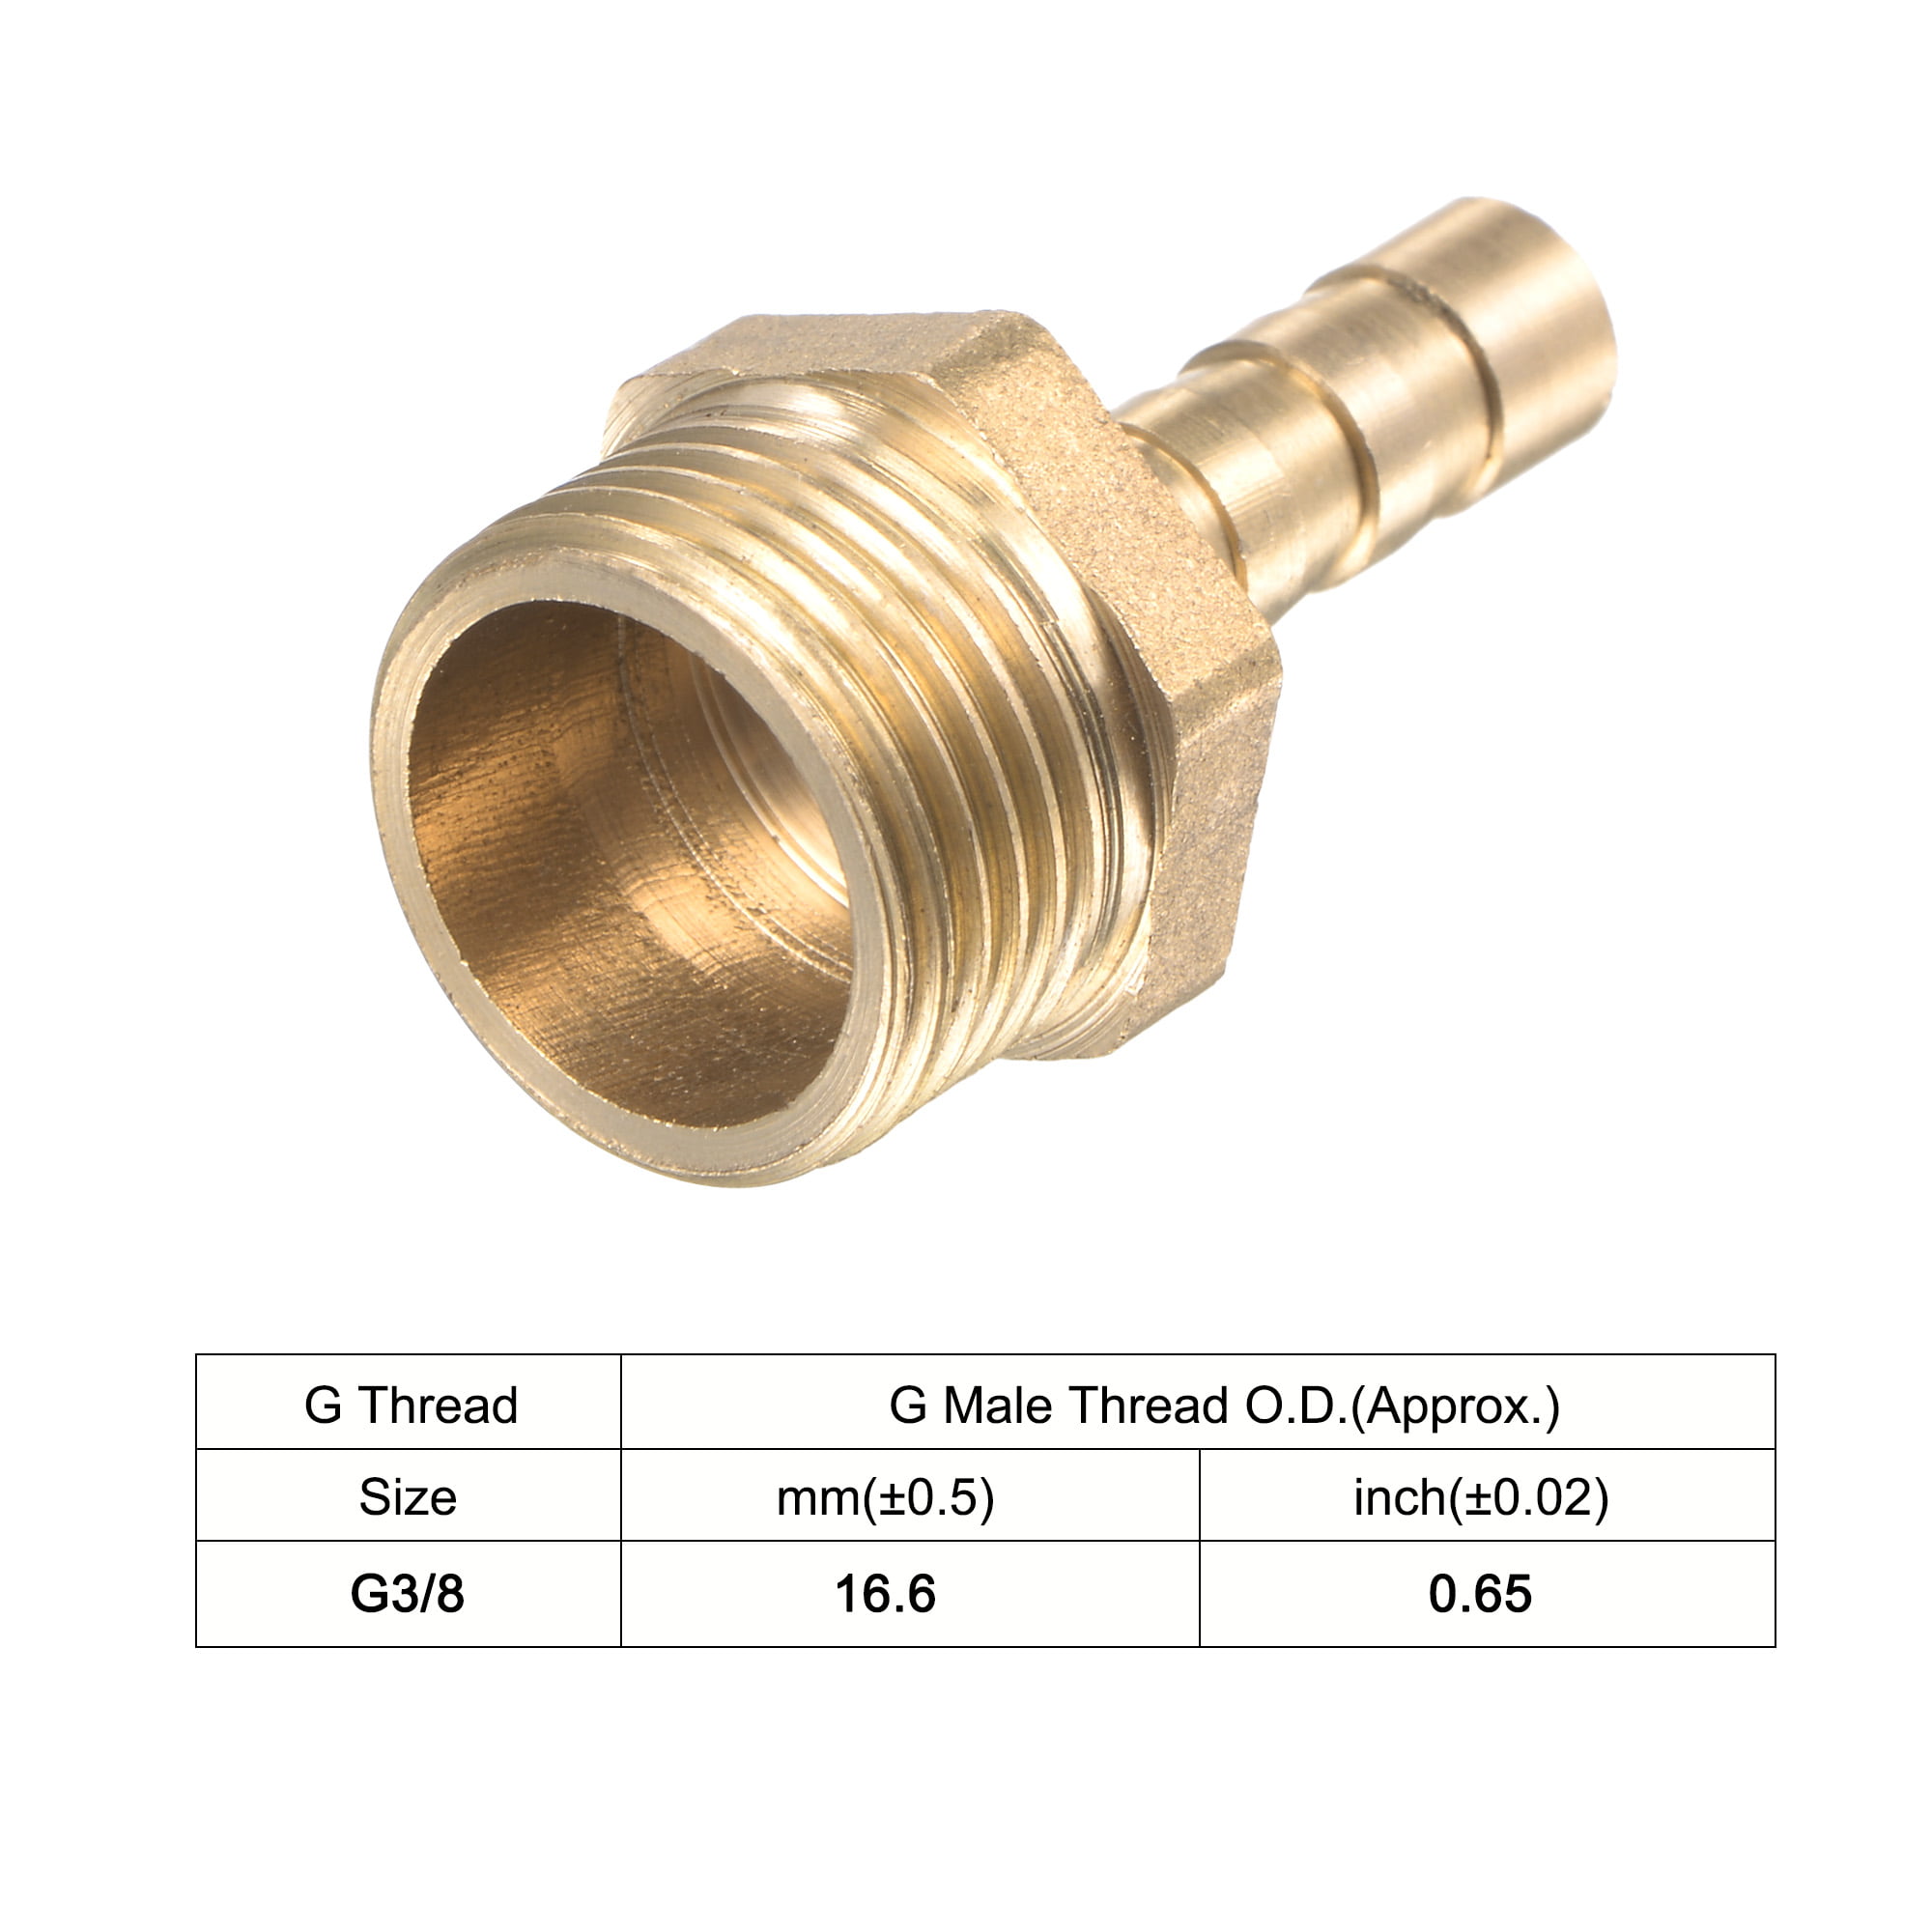 choose thread and hose size 3/4" and 1" bsp range Brass female hosetails 